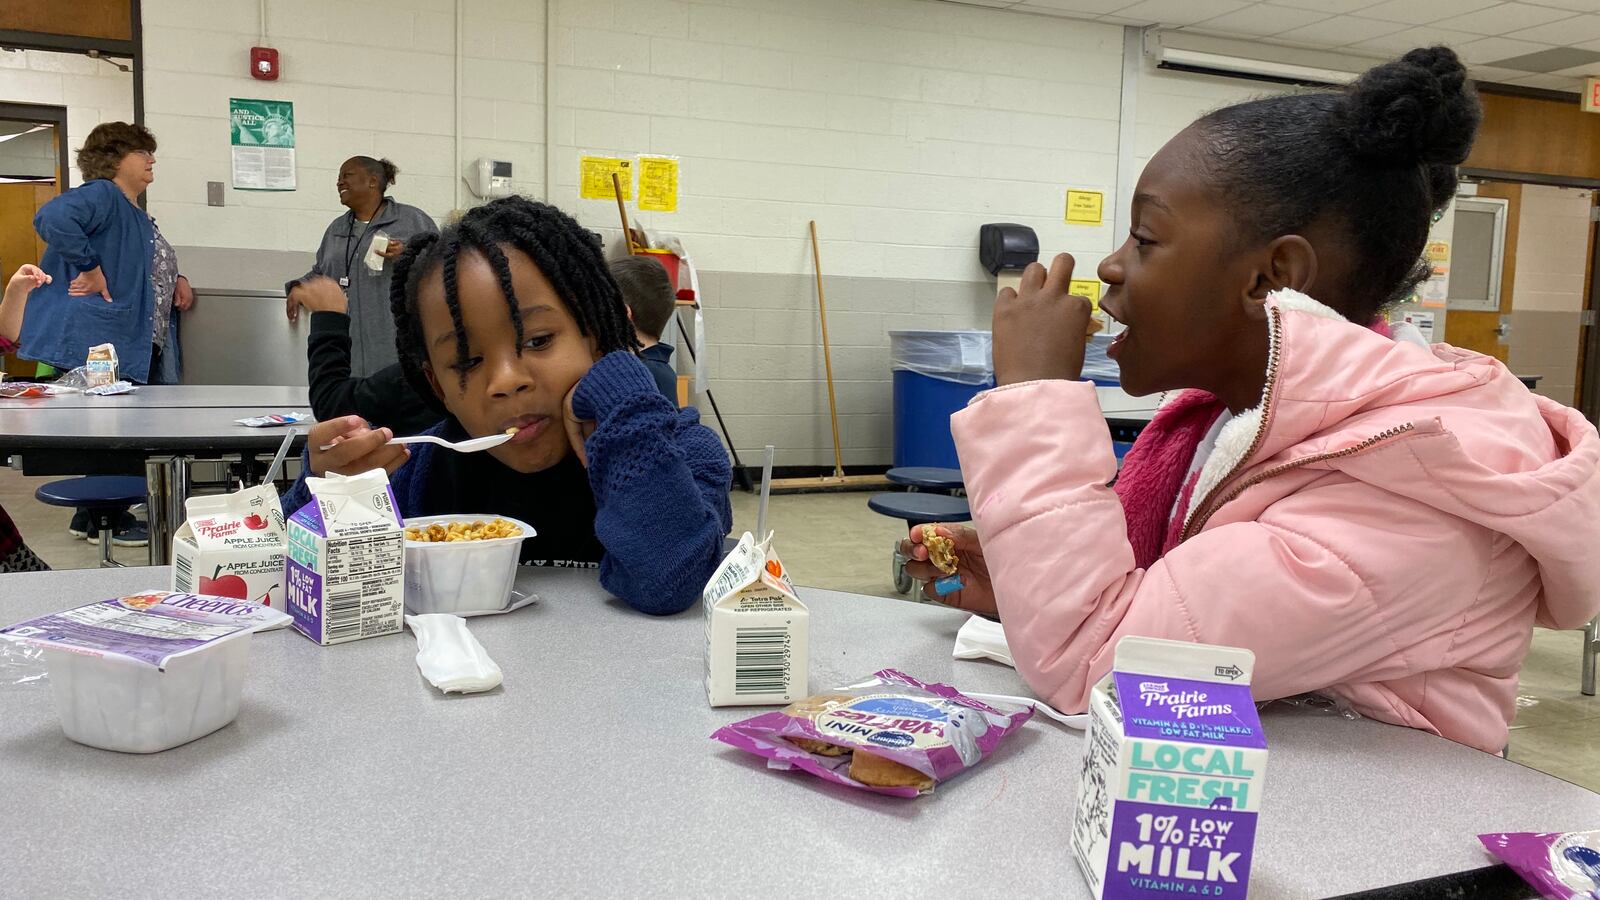 Students eat breakfast at AYS' child care program at School 27 while Indianapolis Public Schools closed for teachers to attend the statehouse Red for Ed rally on Tuesday, Nov. 19, 2019.